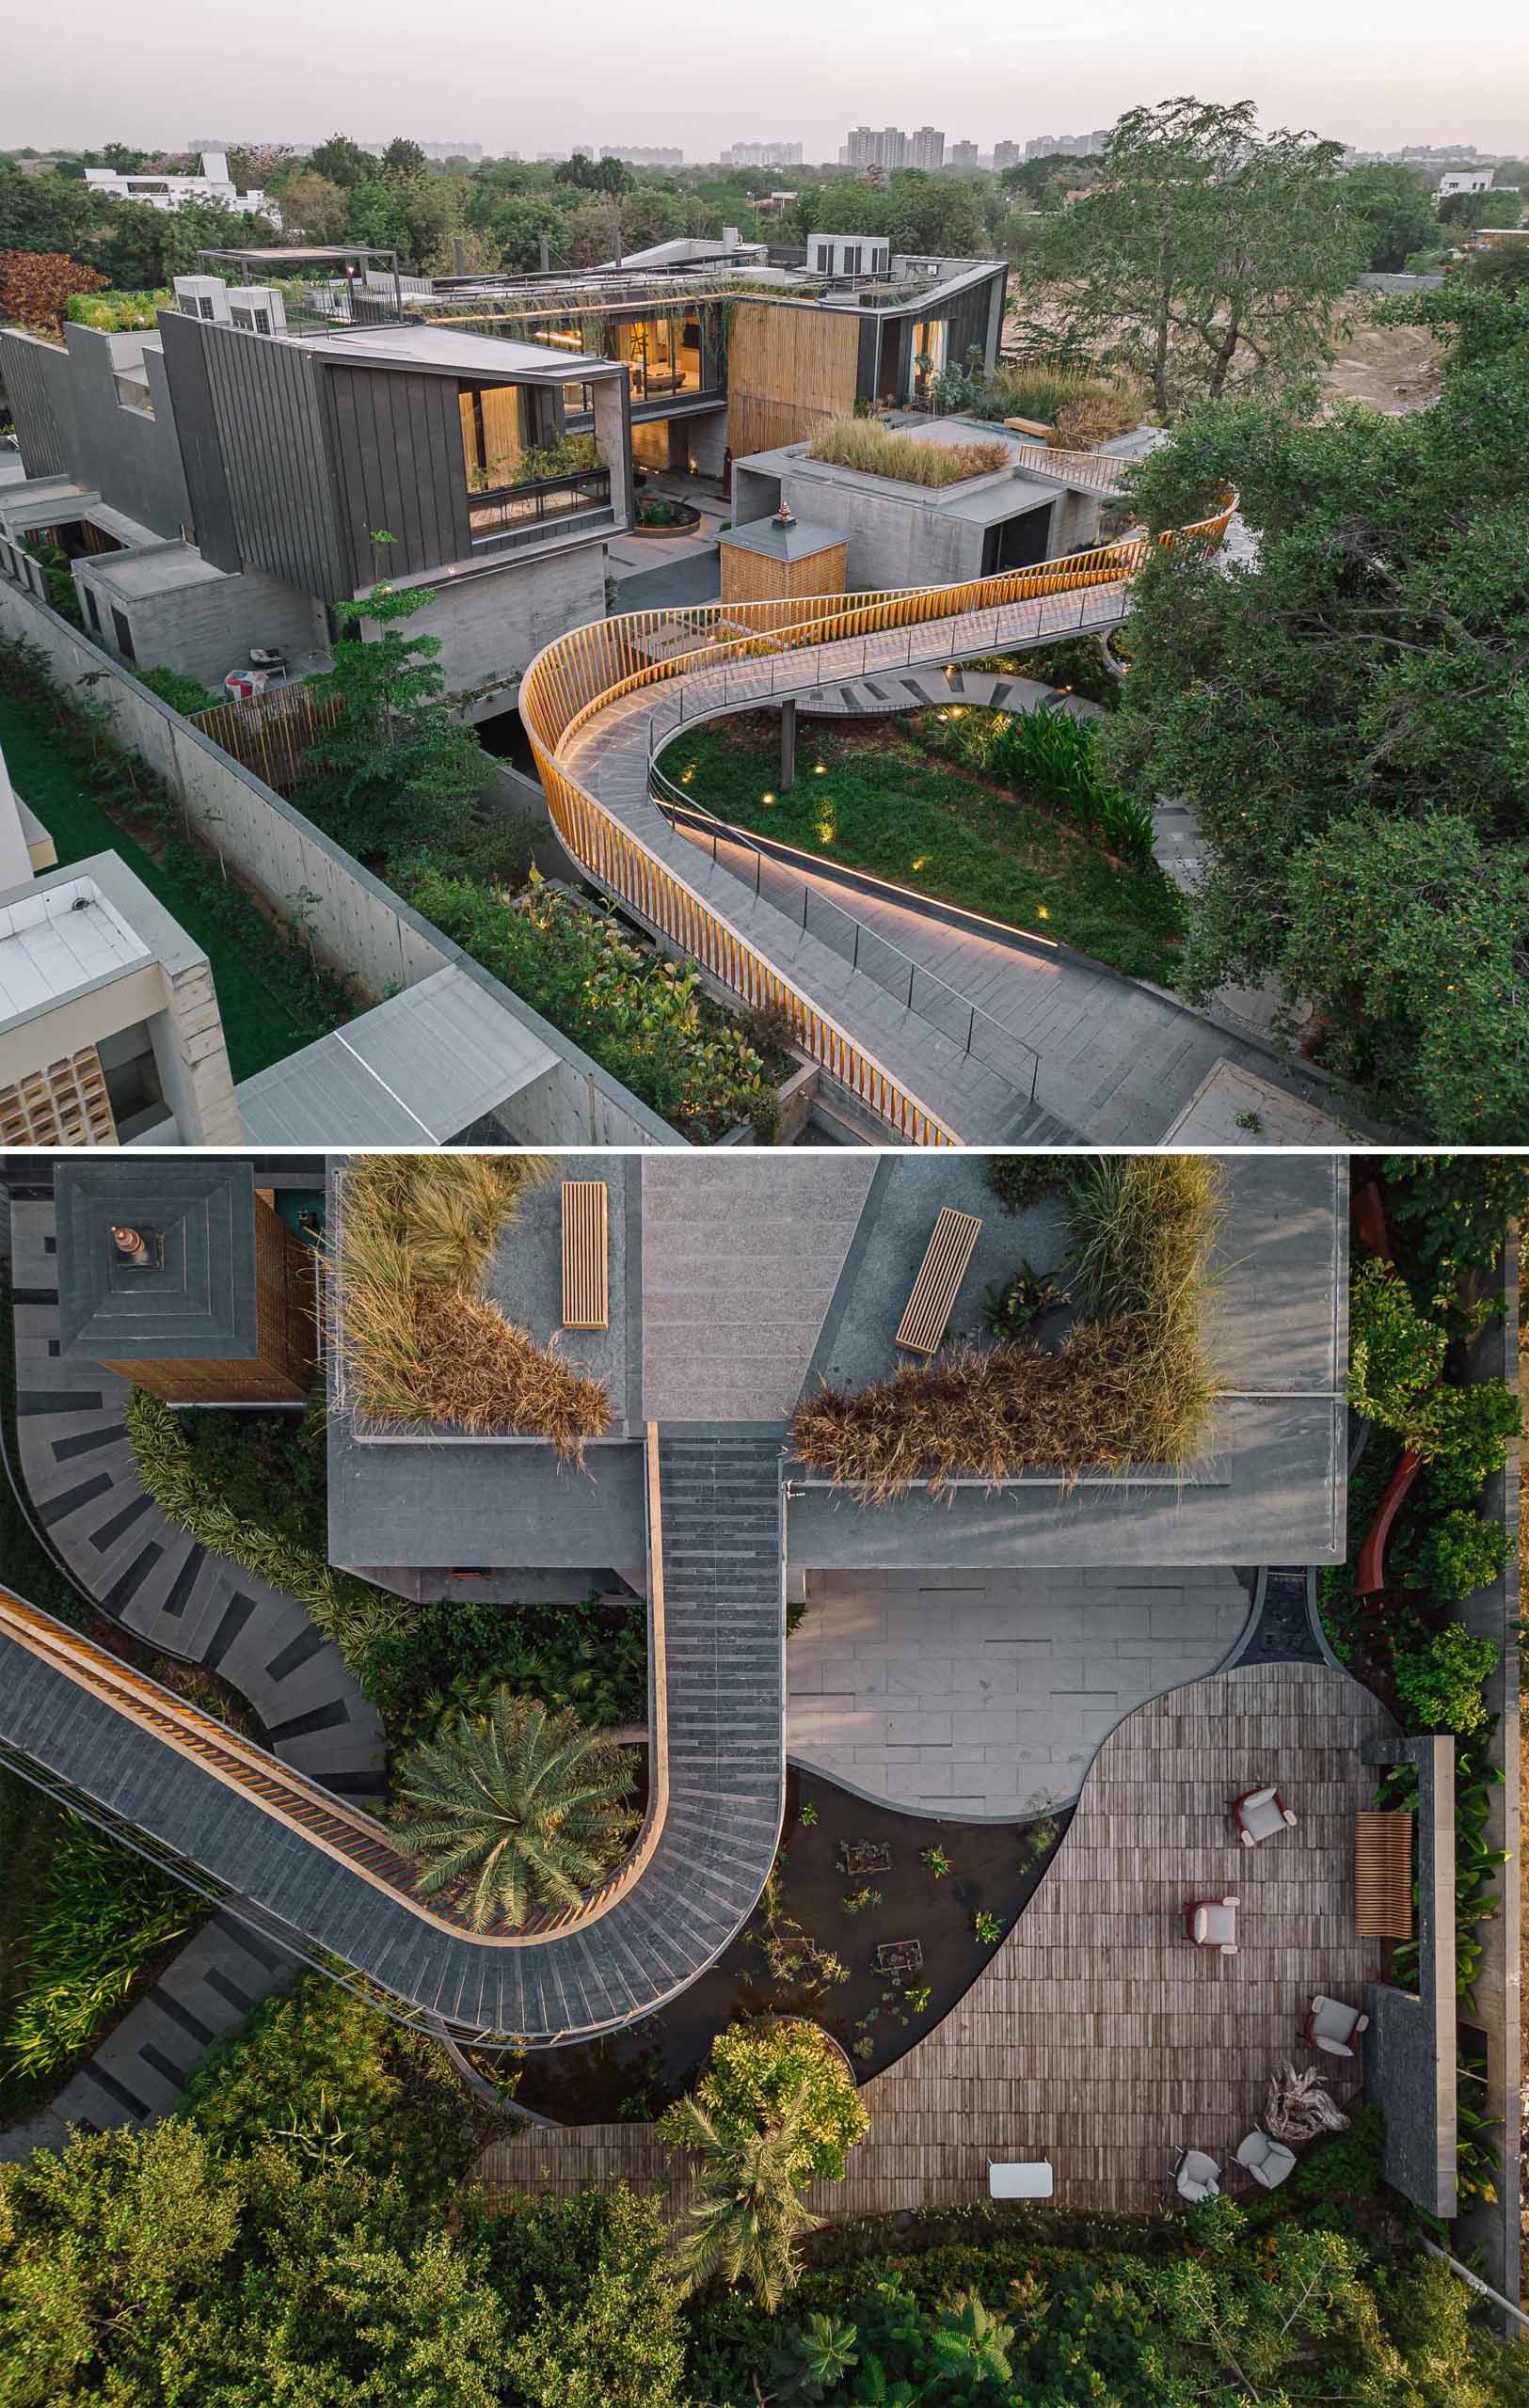 A curving bridge walkway leads to various outdoor entertaining areas of this modern home designed for multi-generational living.